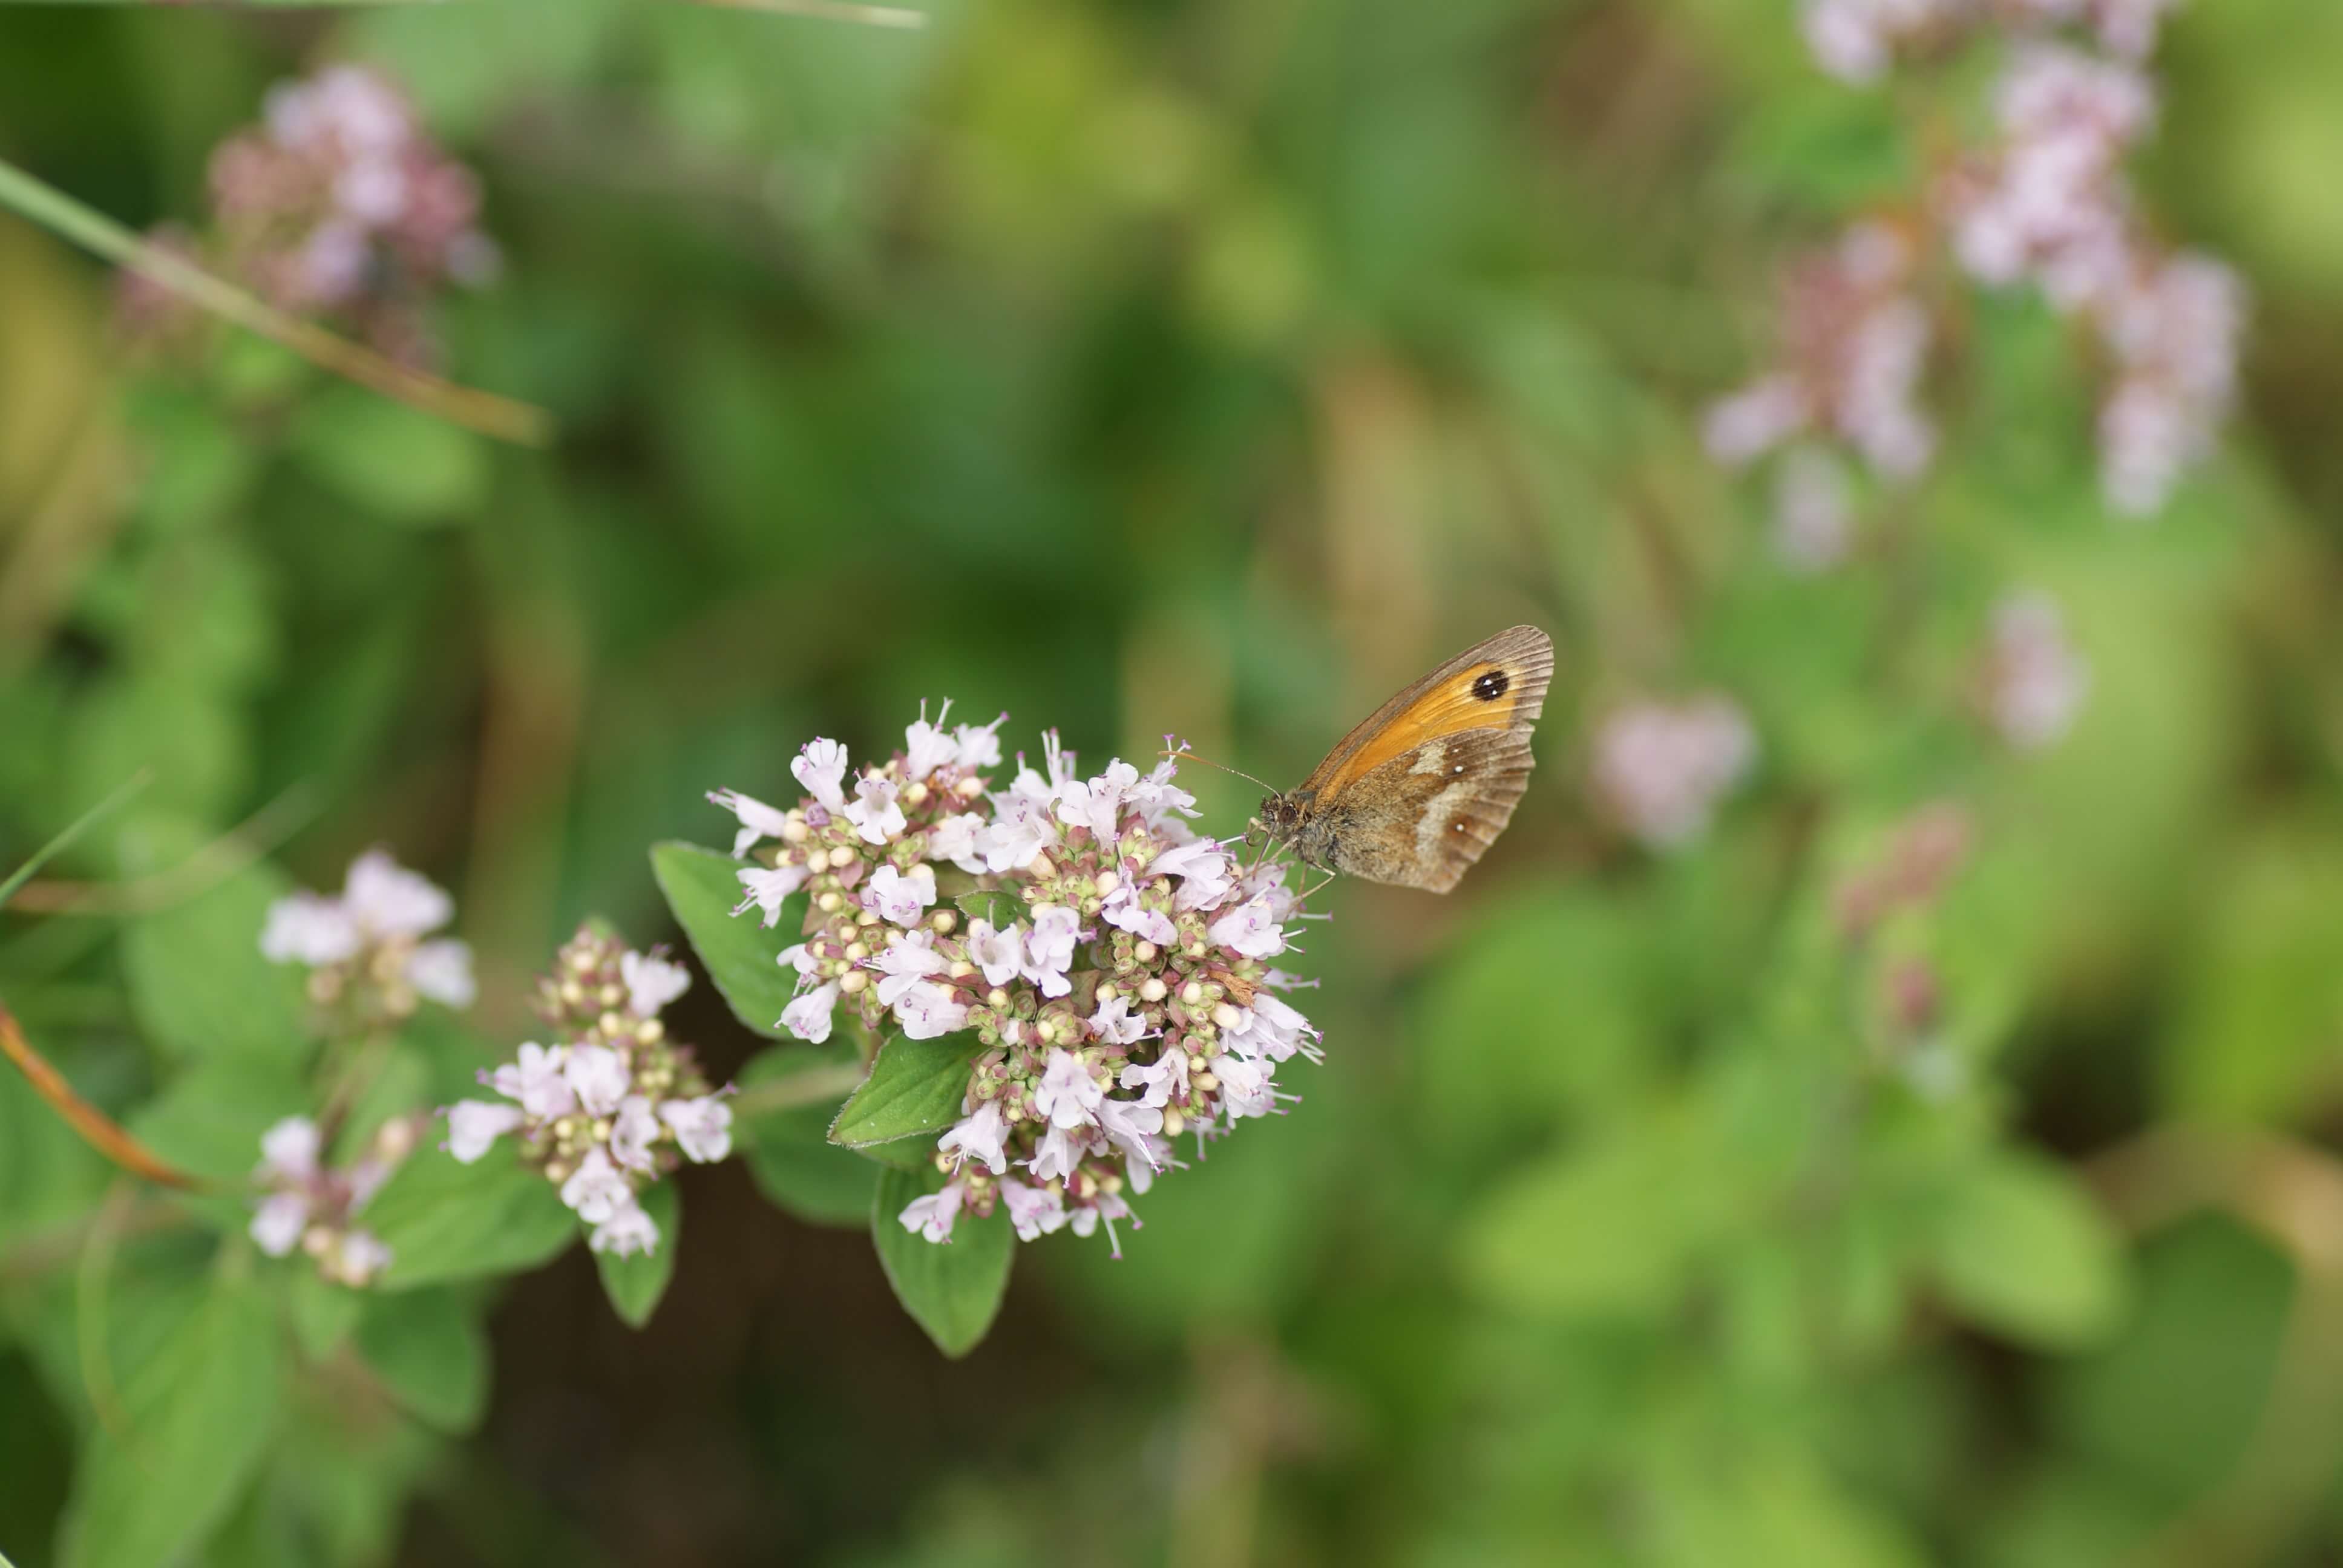 Gatekeeper Butterfly - Dorset glamping in Nature